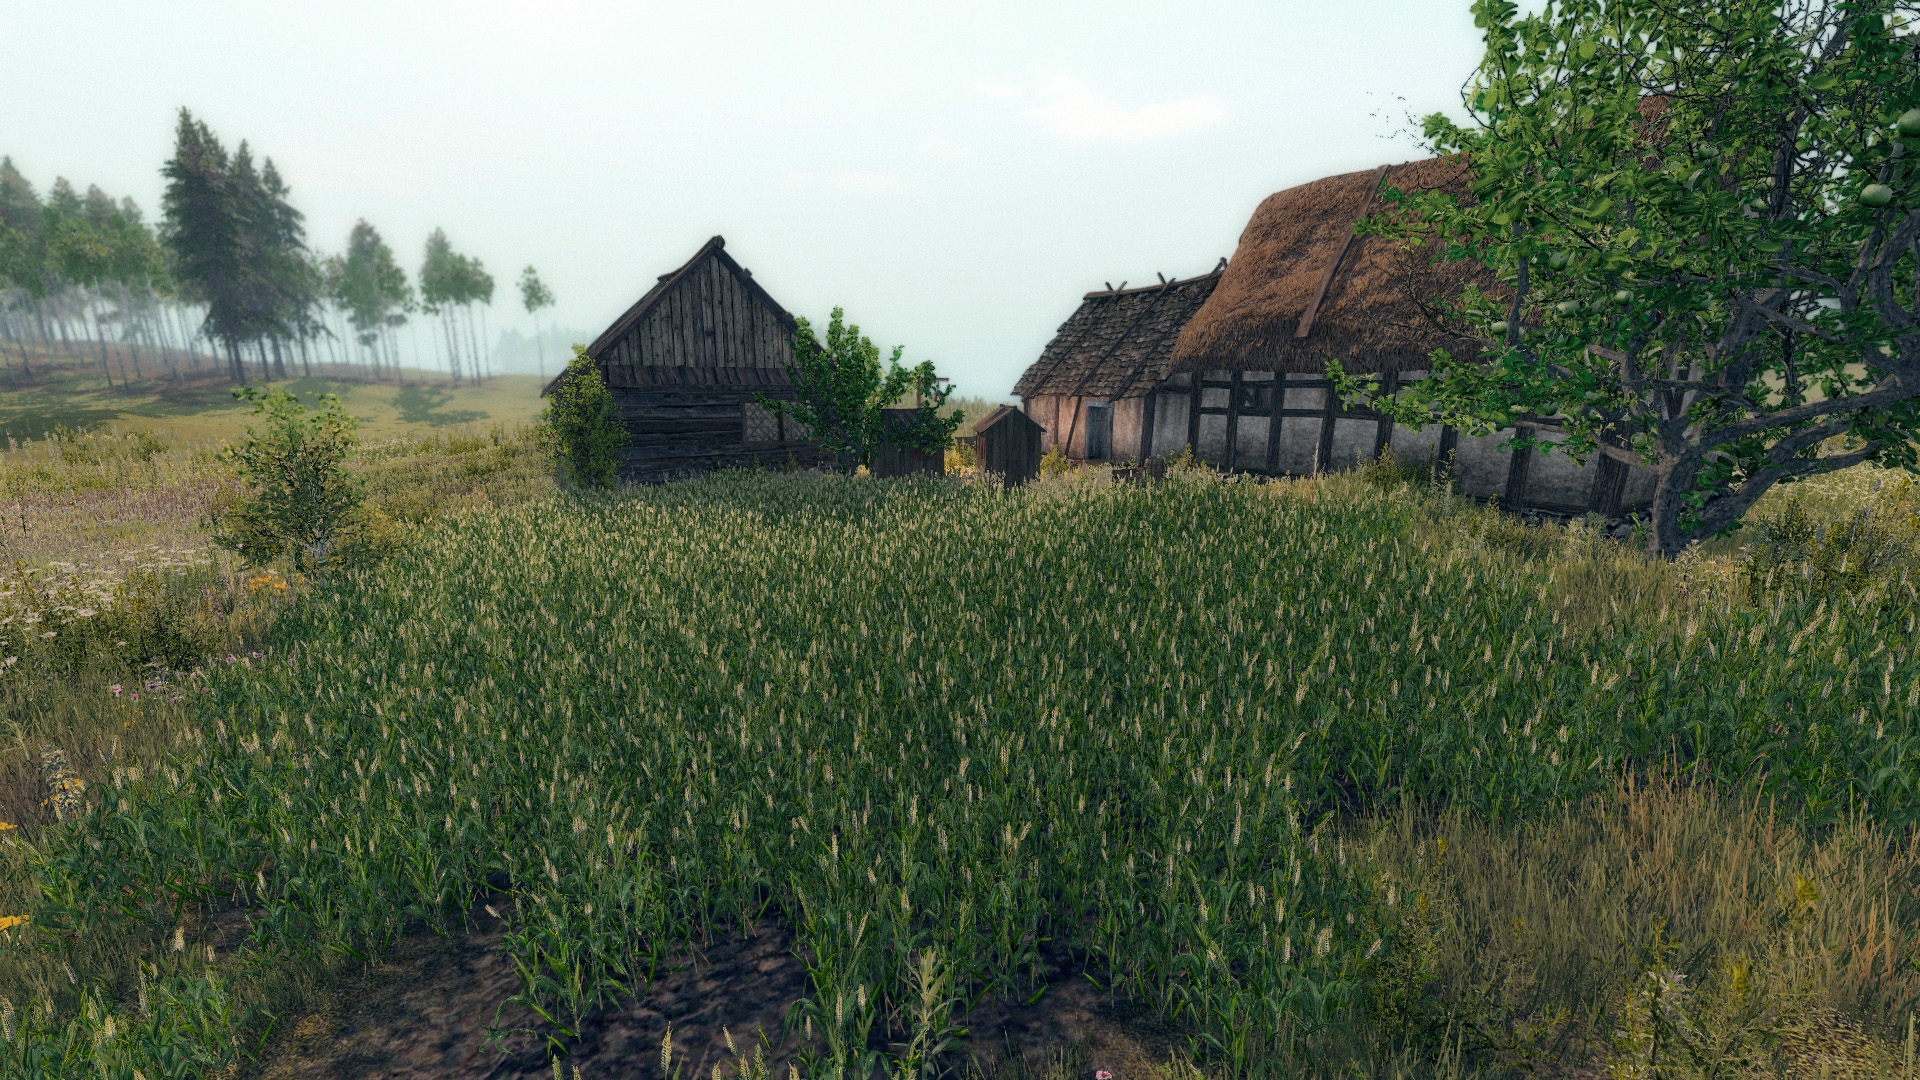 Life is Feudal- Your Own - Games Like Dayz. It is an open world that is set  in the medieval fantasy where you take advanta…